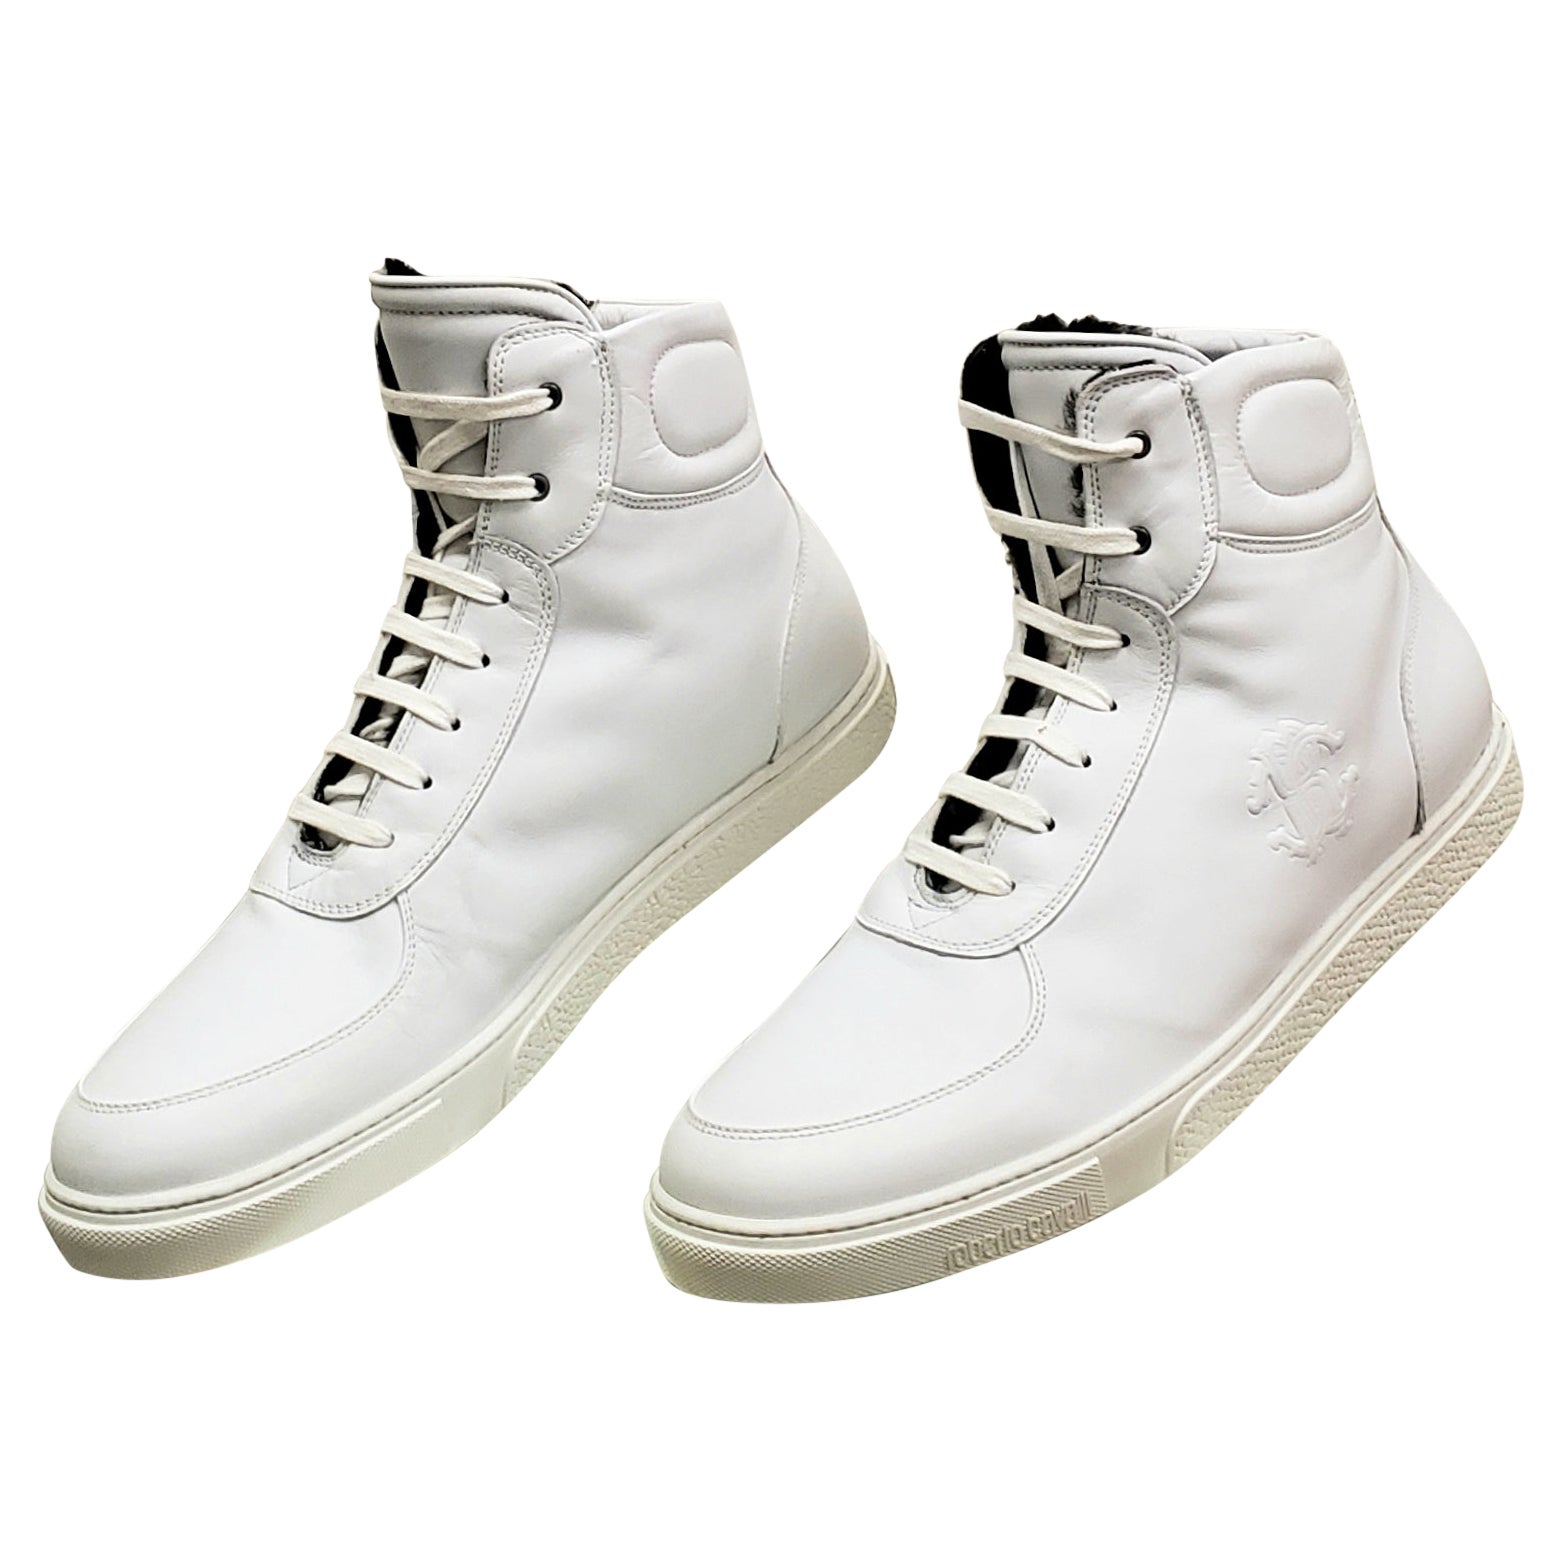 ROBERTO CAVALLI WHITE LEATHER FUR LINED SHEARLING Sneakers 41.5;43;44.5;45